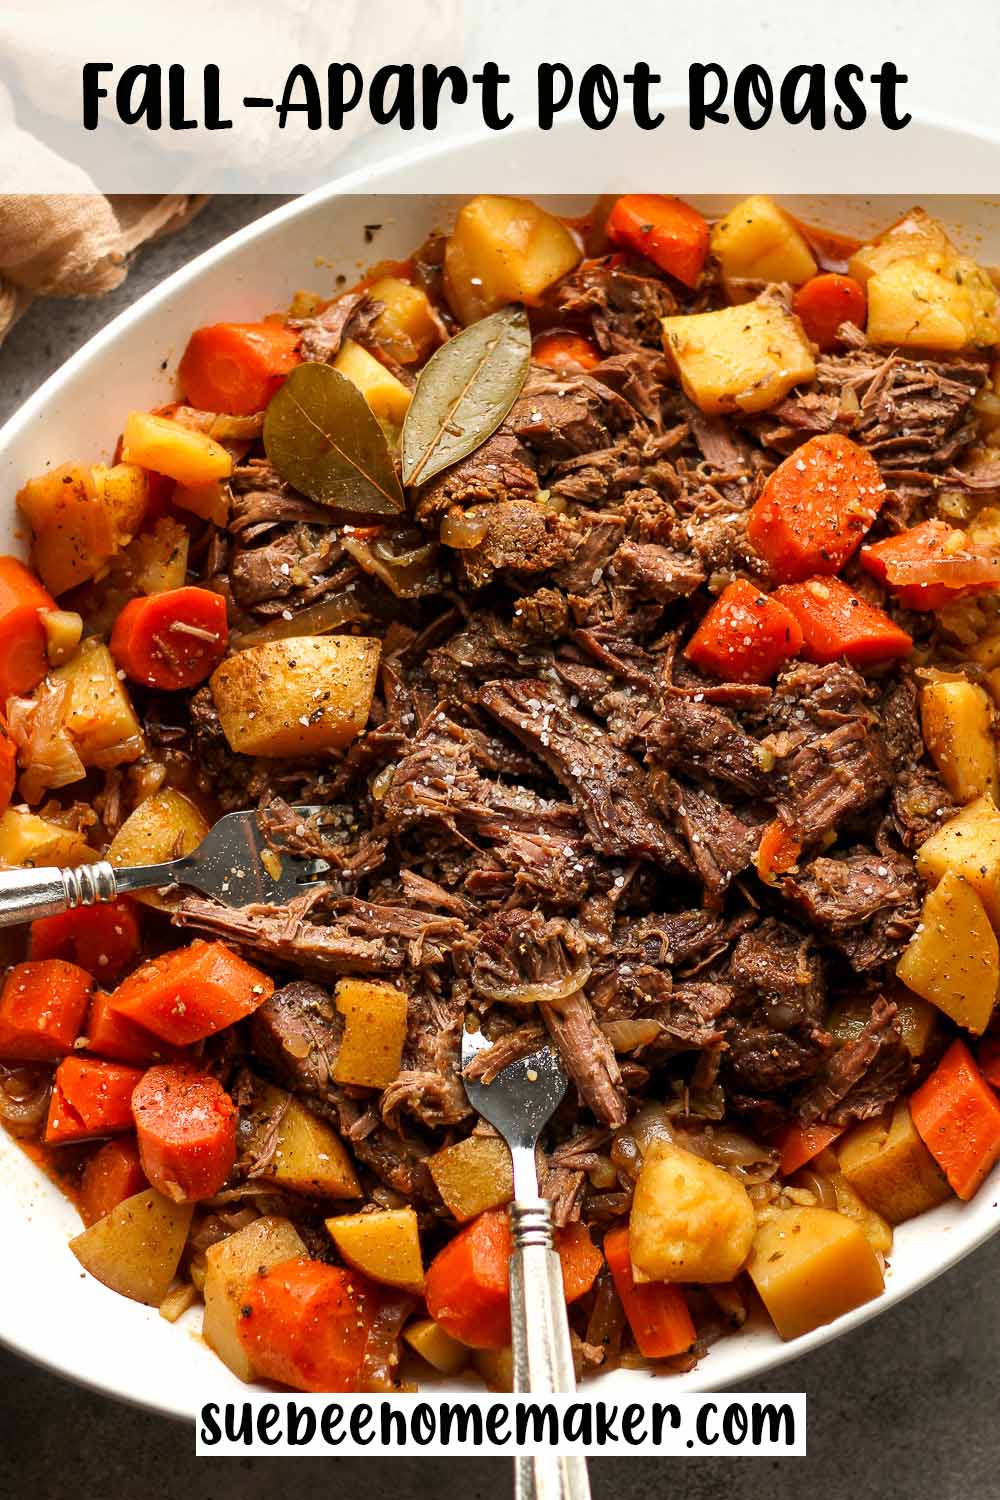 An oblong dish with a fall-apart pot roast with potatoes and carrots.